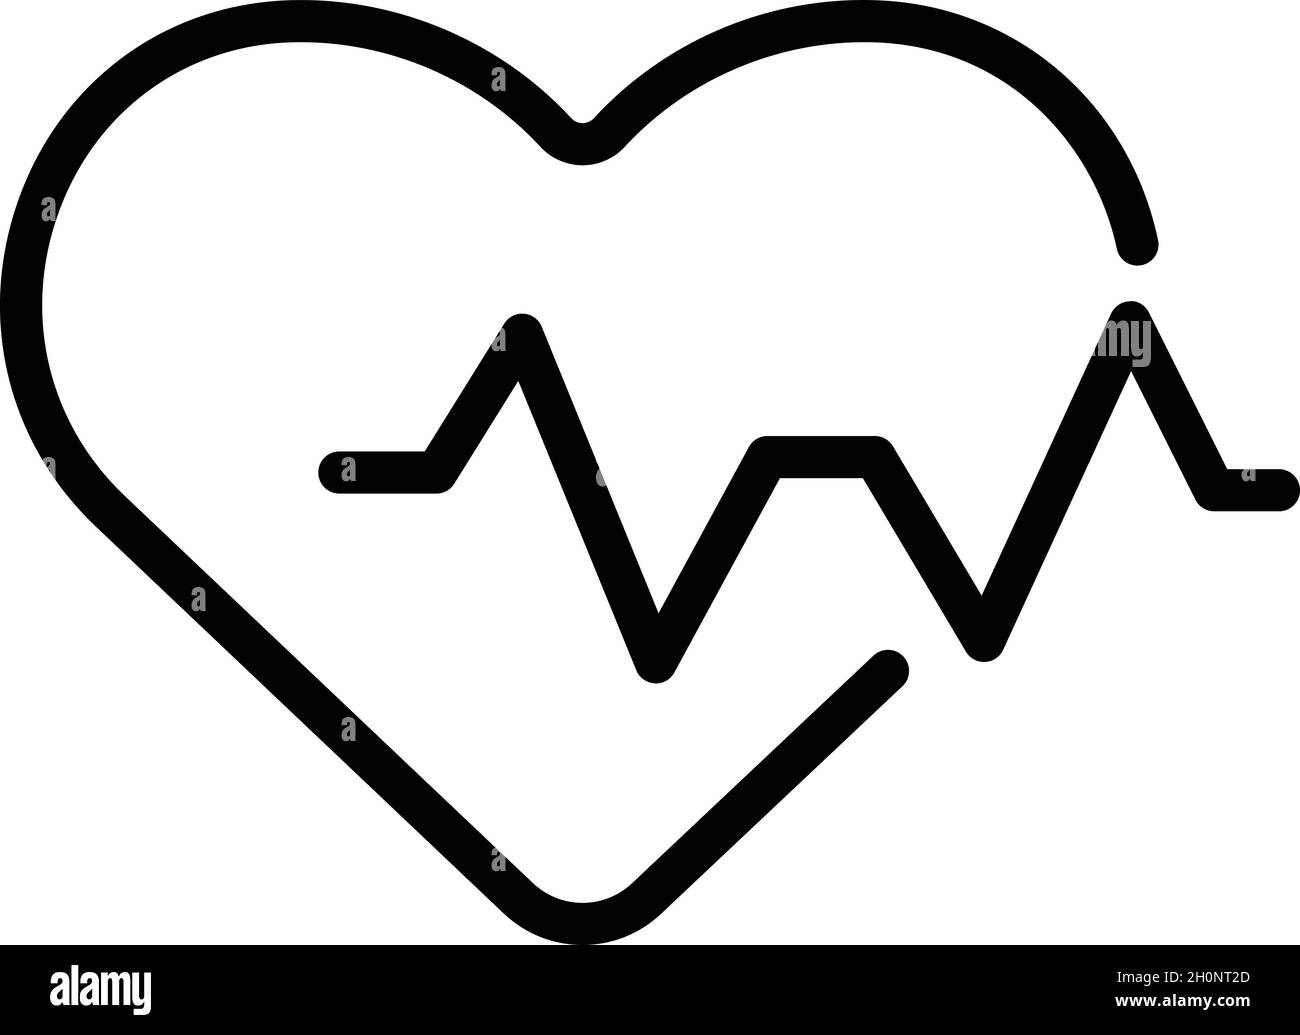 High heart rate icon outline vector. Beat pulse. Cardiac heartrate ...